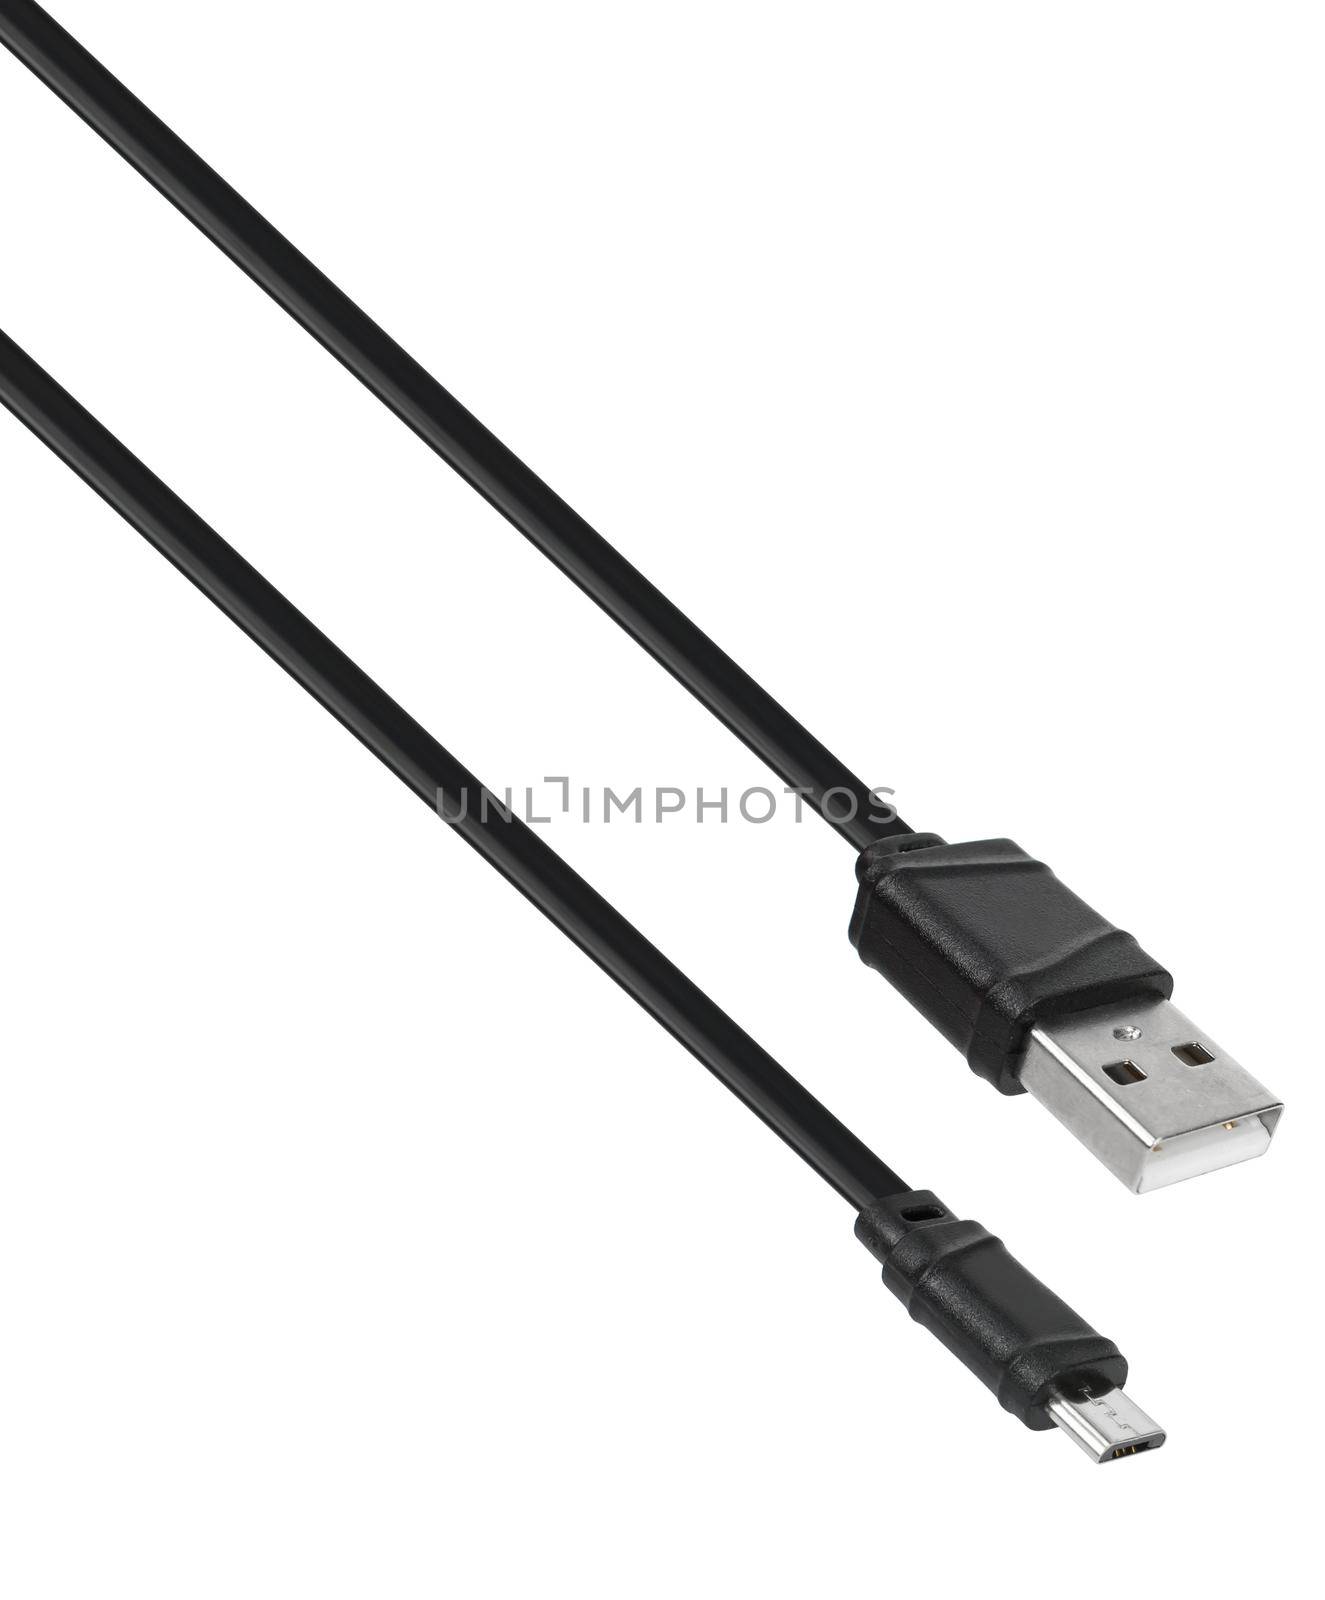 Cable and connector for USB, Micro USB isolated on white background